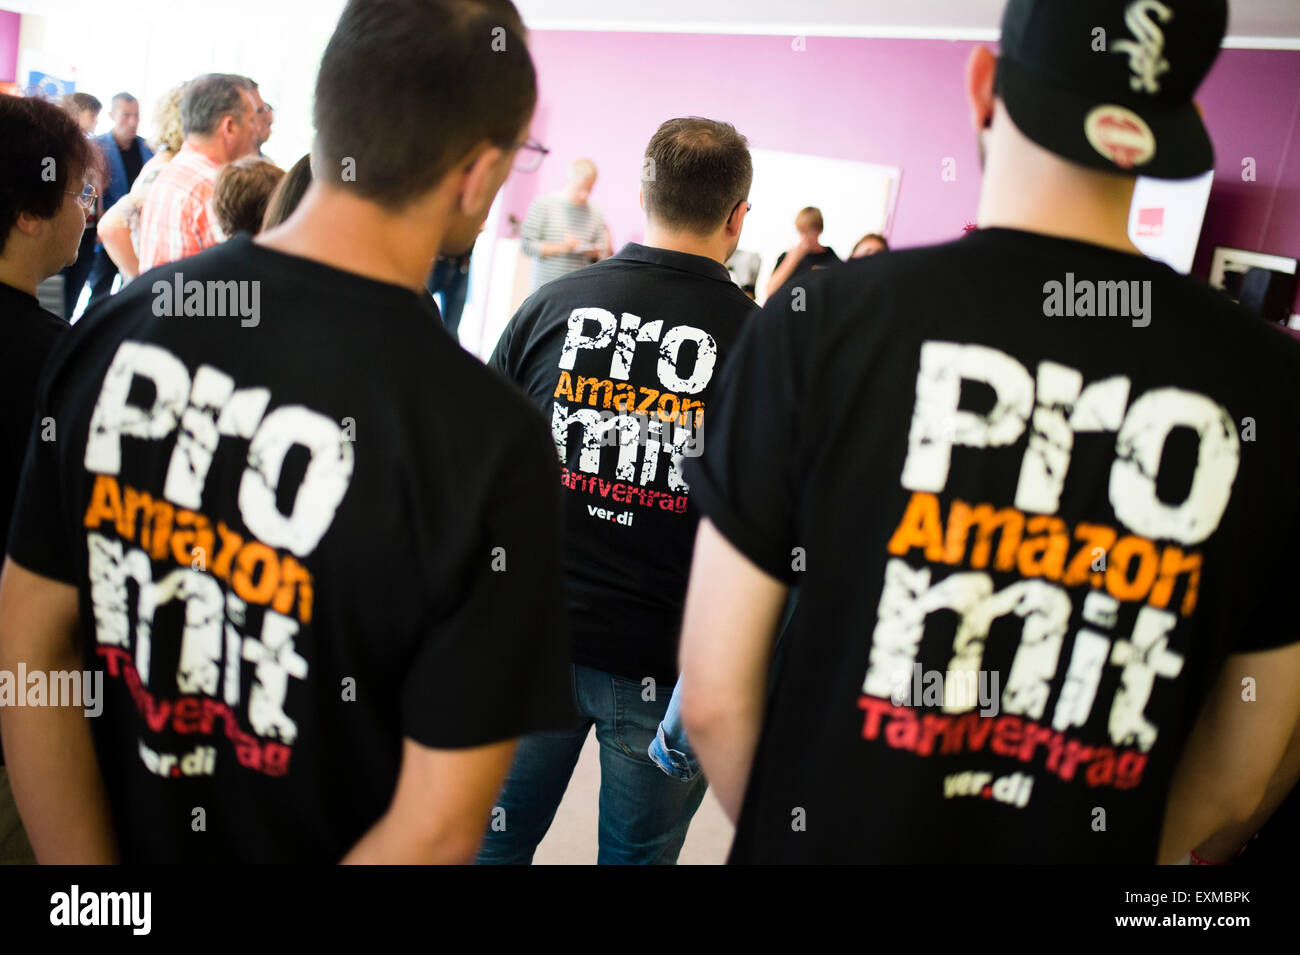 Berlin, Germany. 15th July, 2015. Employees and volunteers of the ver.di trade union wear shirts reading 'Pro Amazon mit Tarifvertrag' (lit. Pro Amazon with labor agreement) in Berlin, Germany, 15 July 2015. They attended a workshop of the trade union that took place on occasion of the 20th anniversary of Amazon in the 'Clara Sahlberg' centre in Berlin. Photo: GREGOGR FISCHER/dpa/Alamy Live News Stock Photo